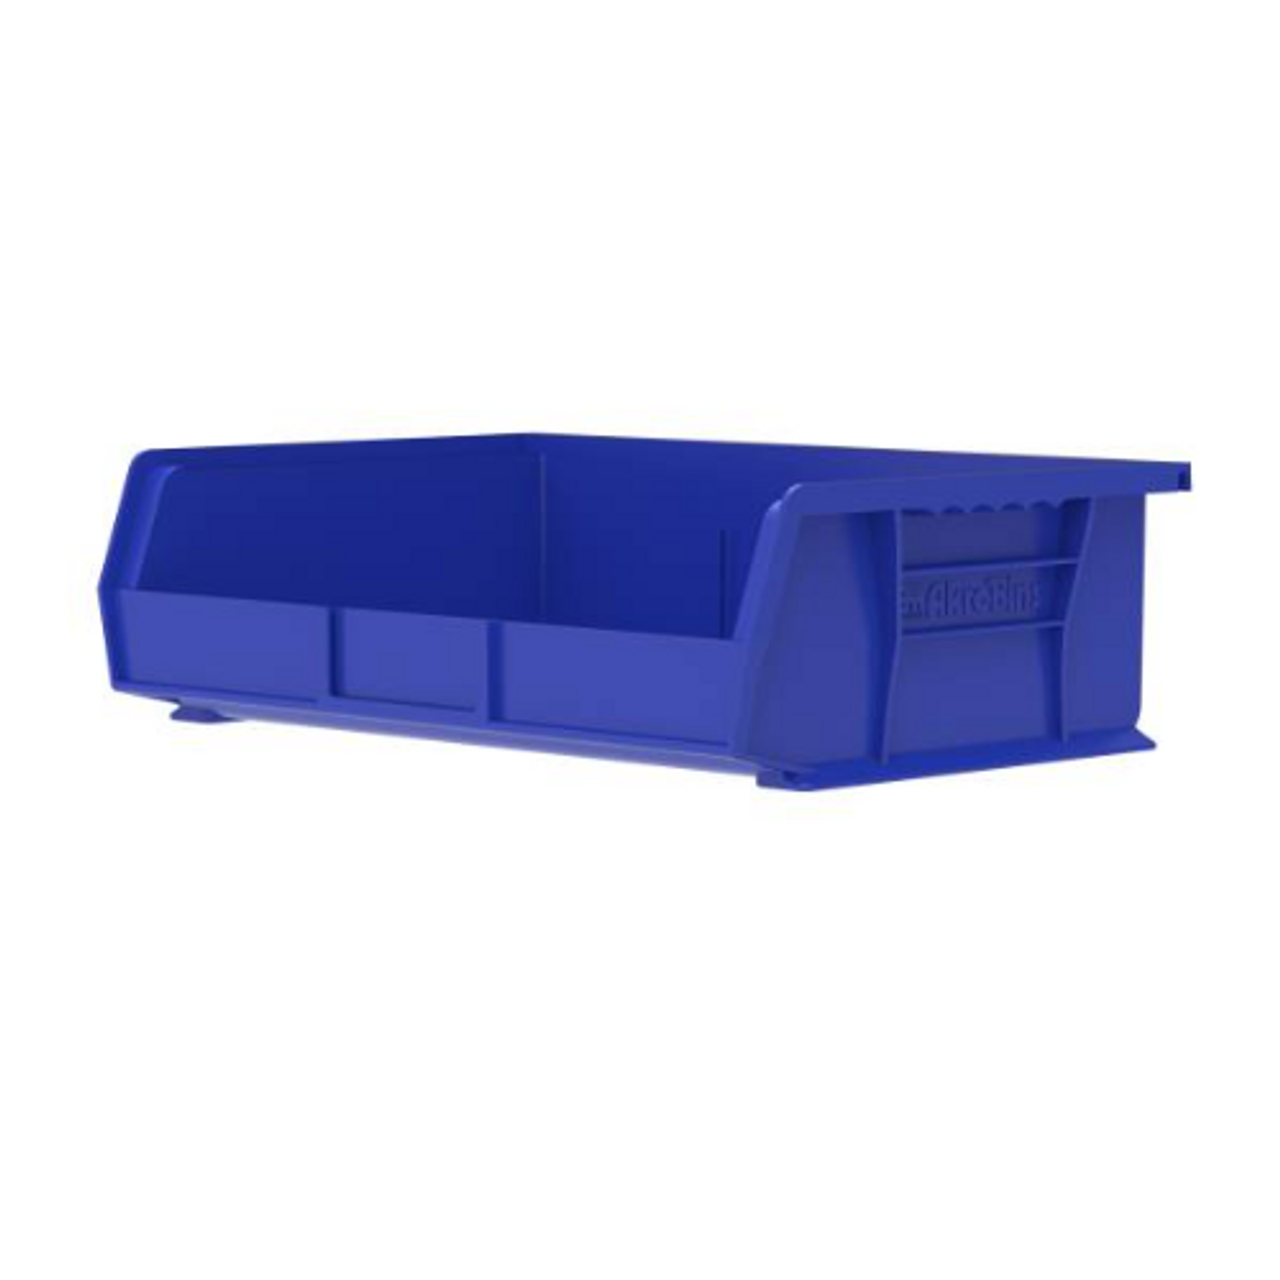 30255 10-7/8" x 16-1/2" x5" Blue Hanging and Stacking Bin